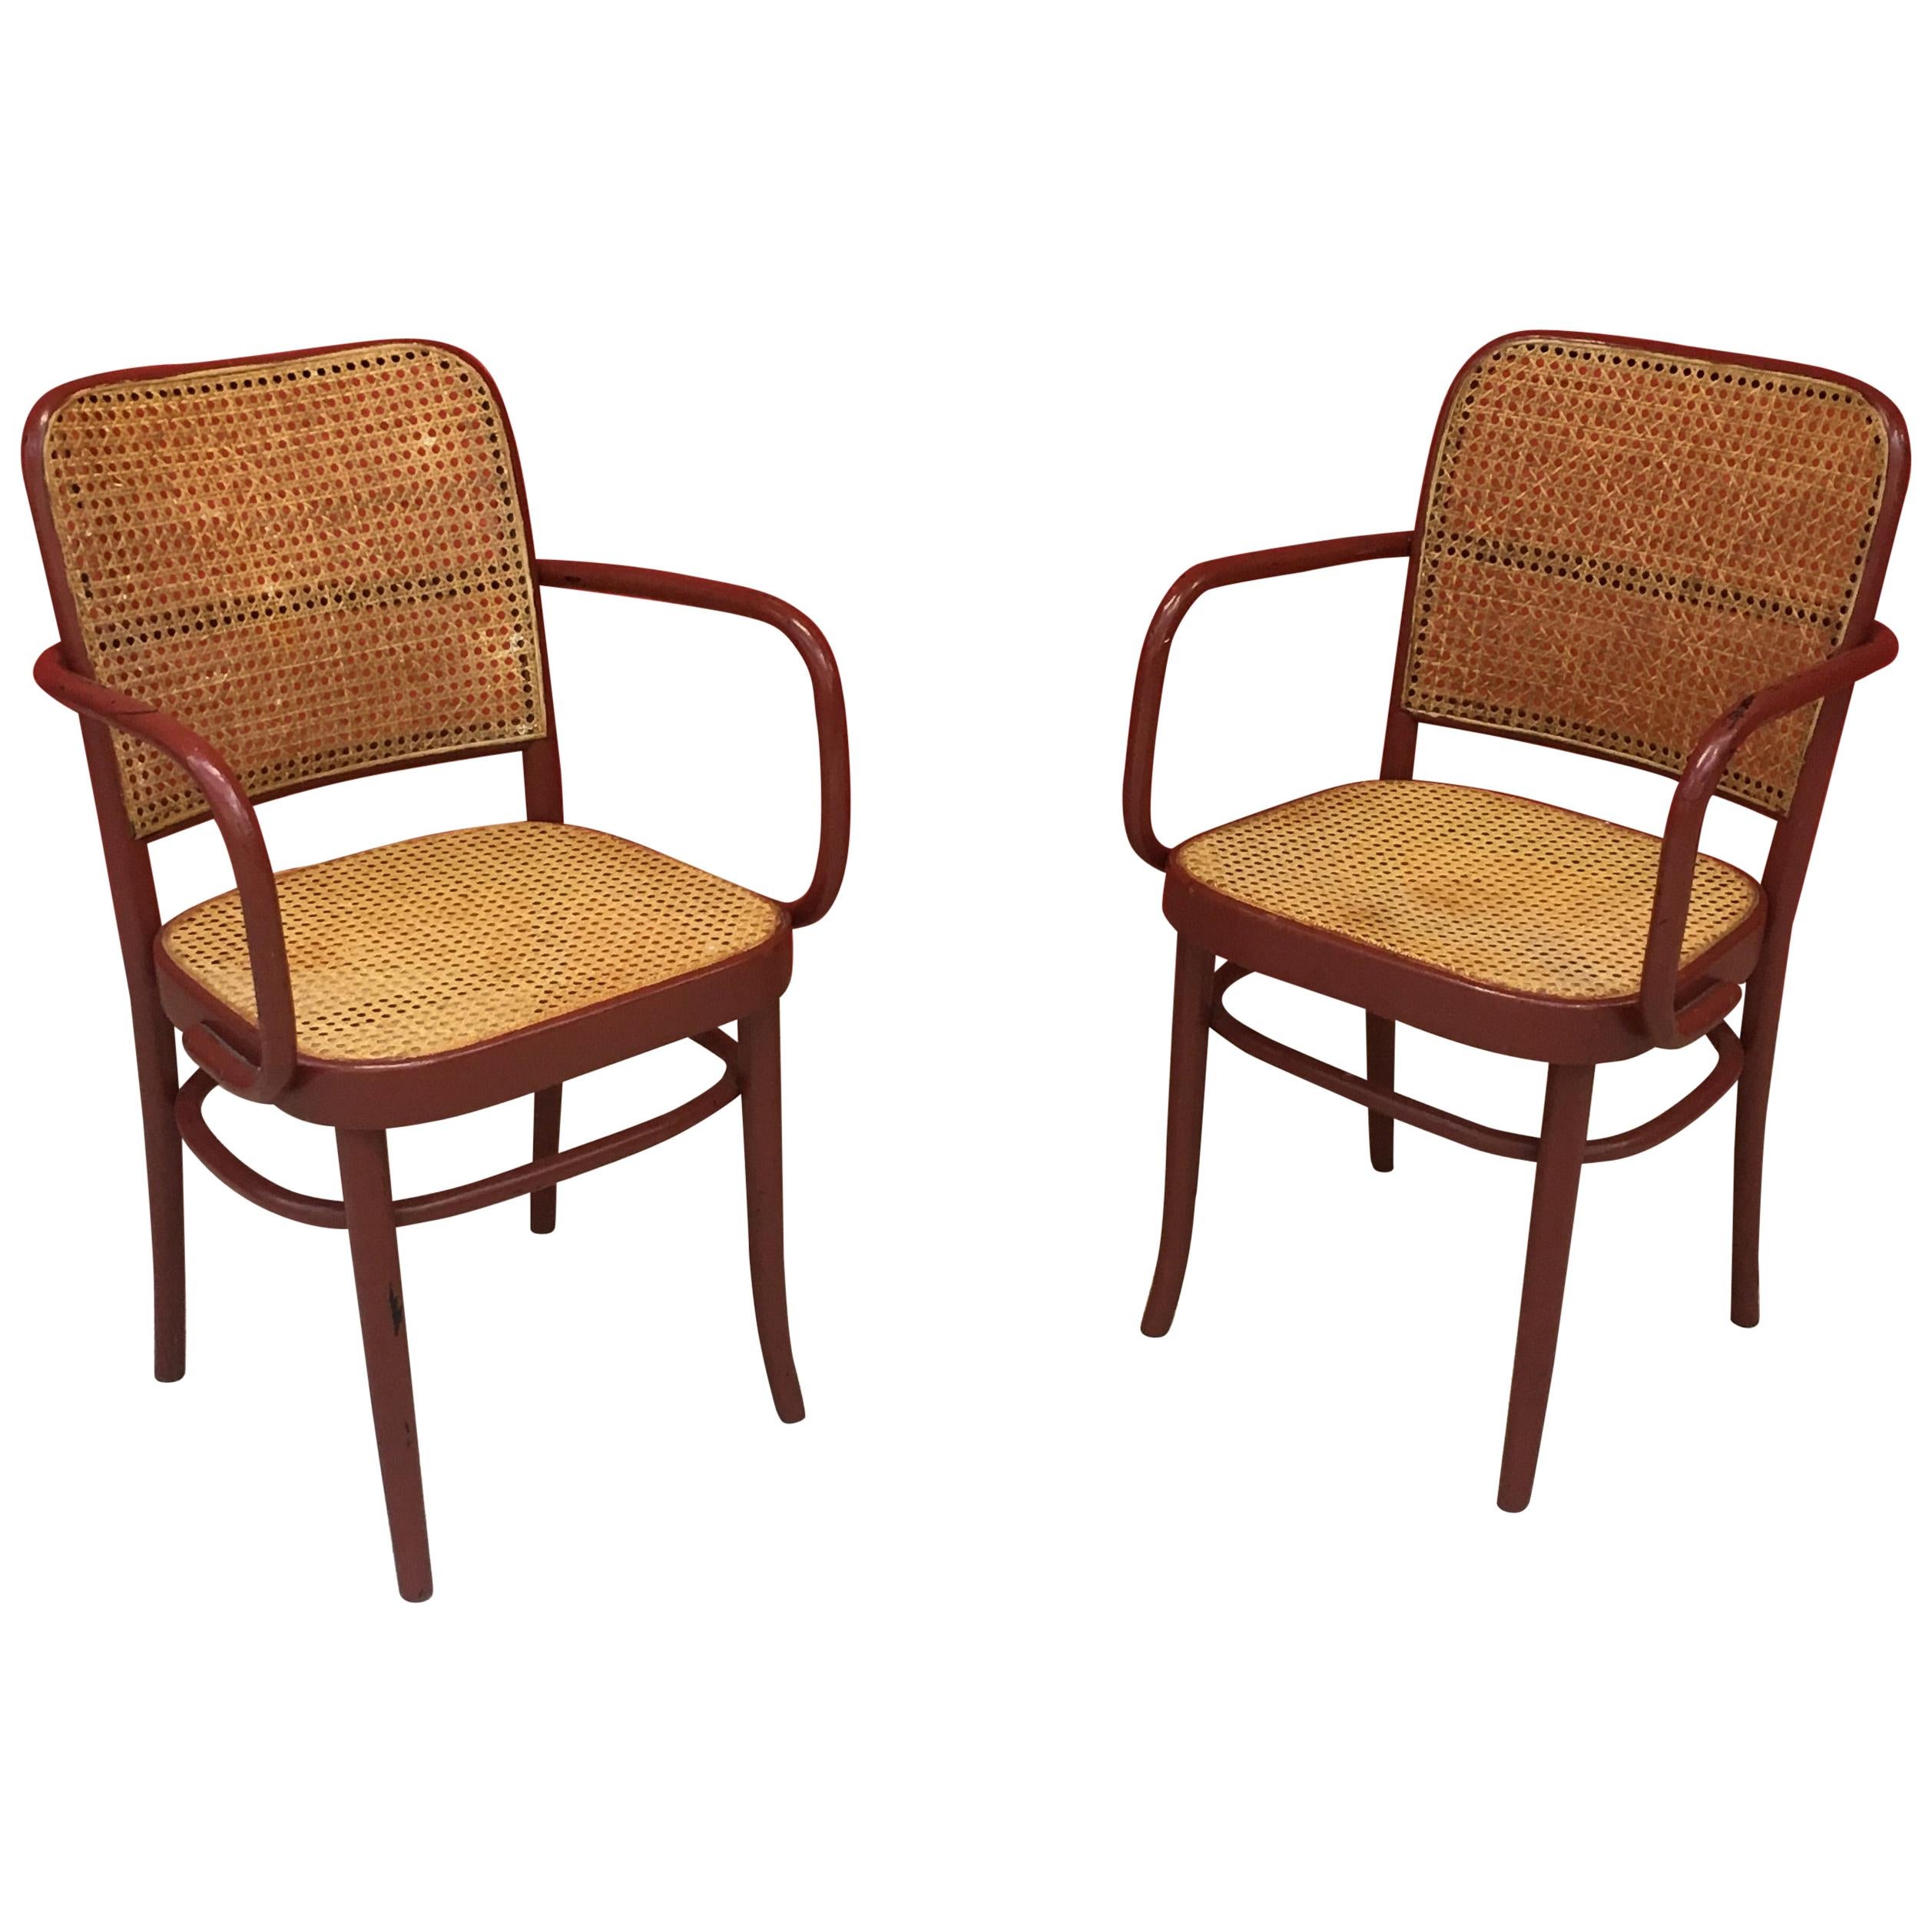 Joseph Frank , Pair of Thonet Style Armchairs, circa 1950 For Sale